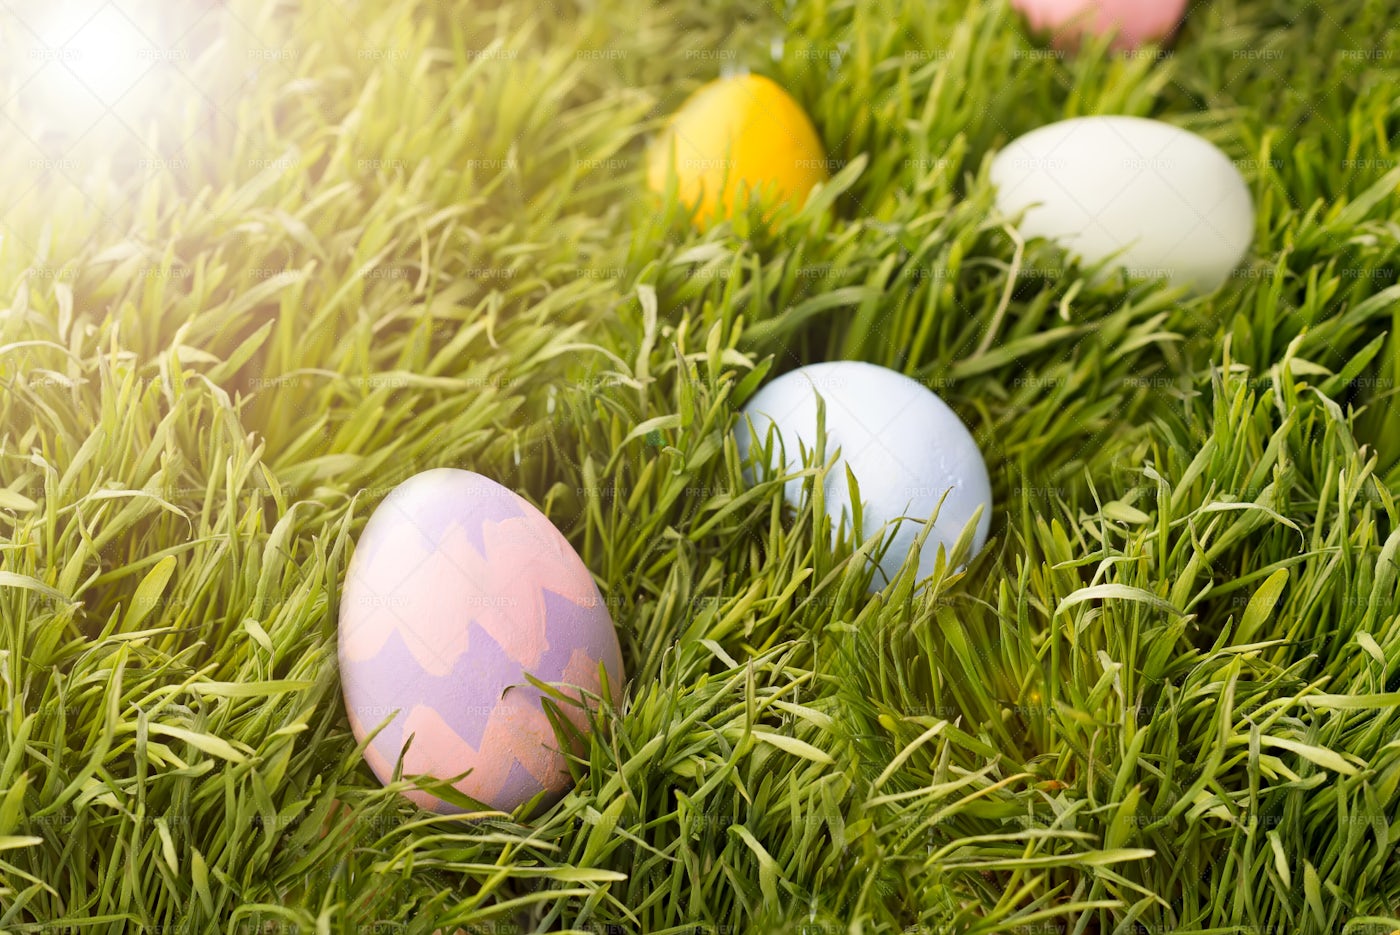 Easter Eggs In The Grass: Stock Photos